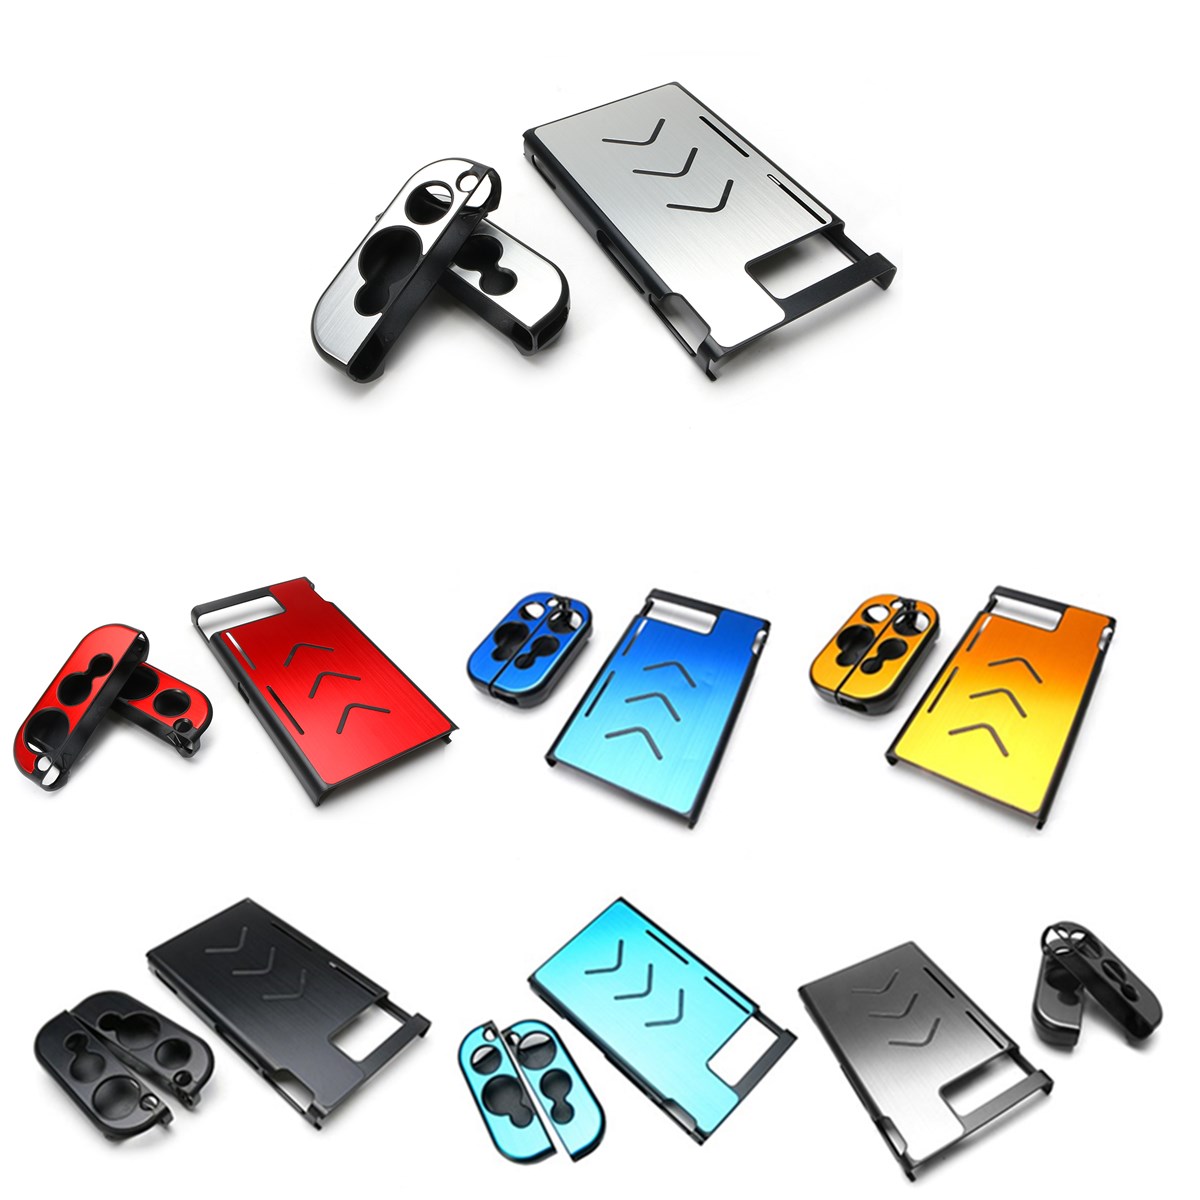 Replacement Accessories Housing Shell Case Protective For Nintendo Switch Controller Joy-con 1